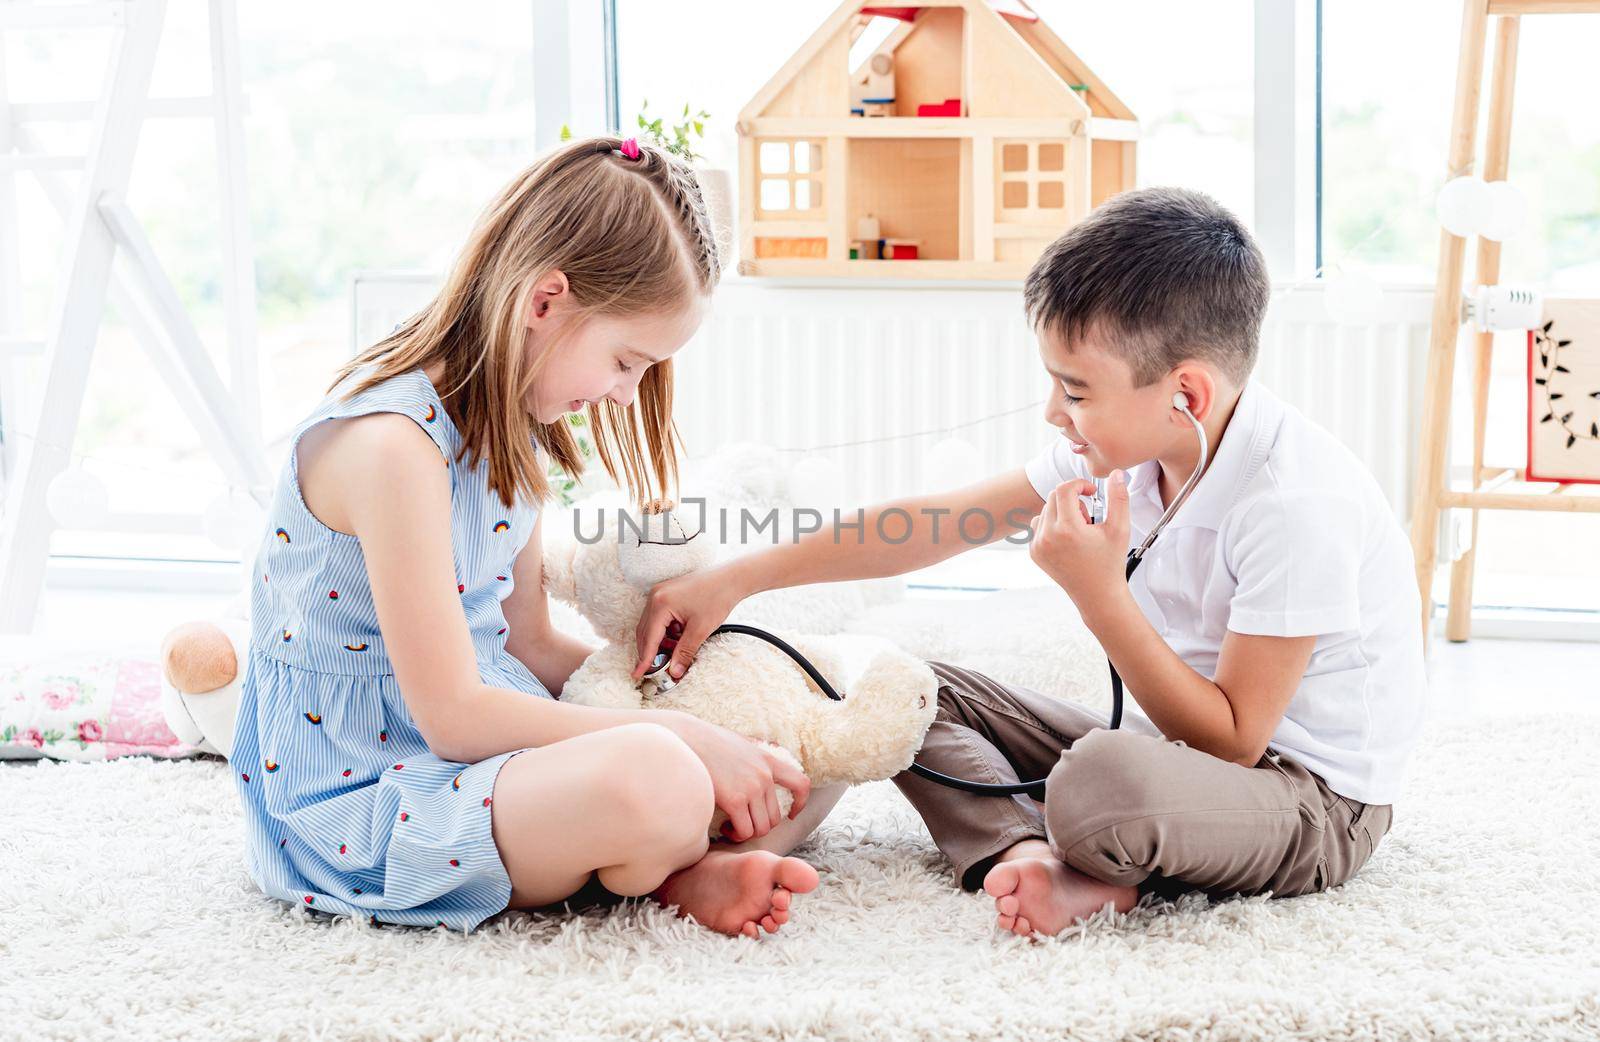 Smiling children playing doctor with teddy bear in bright room